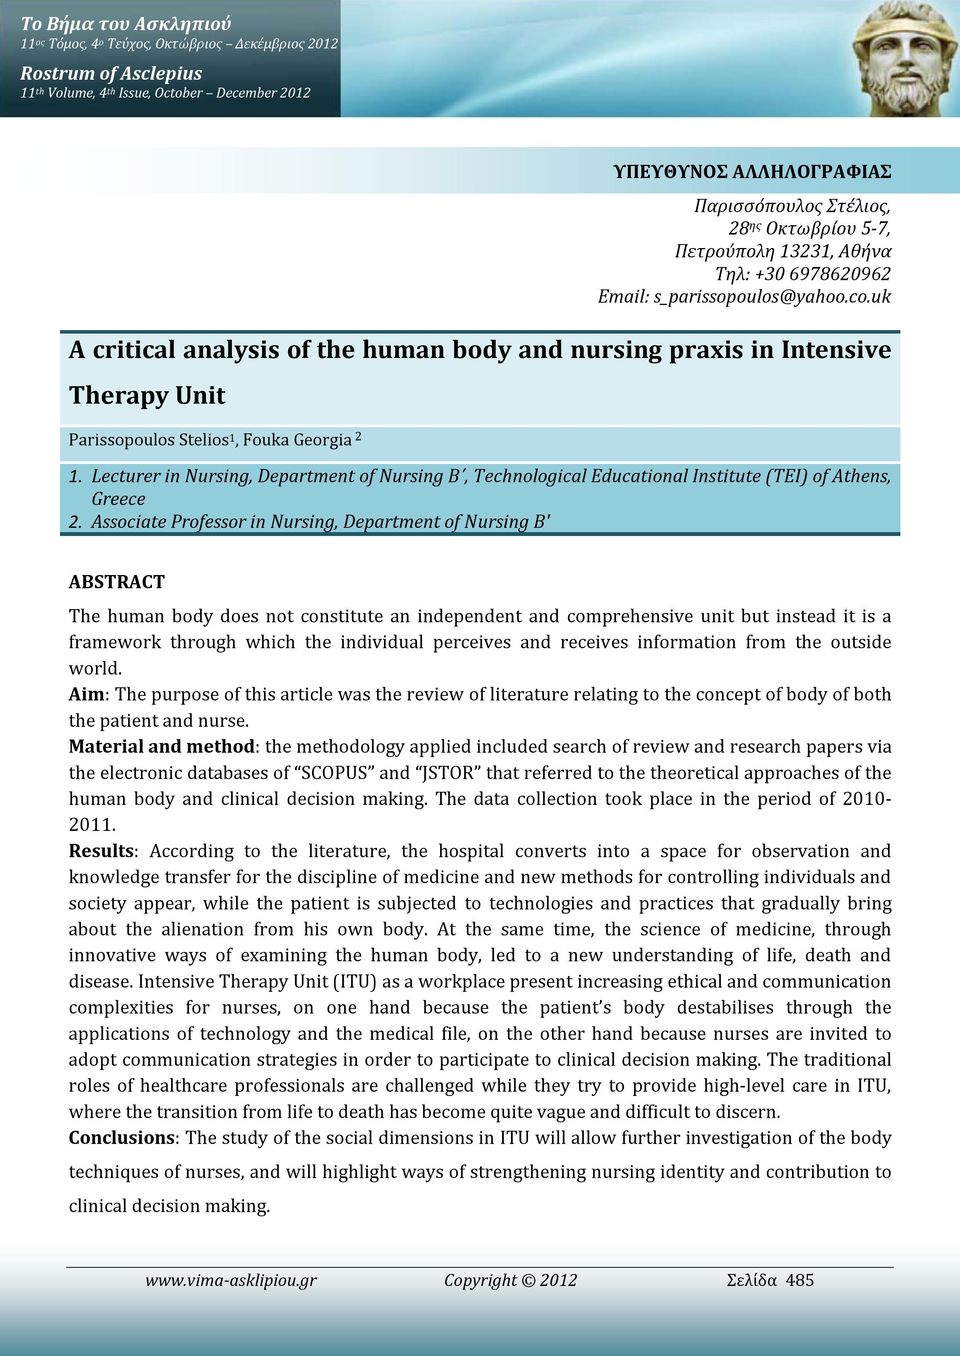 uk A critical analysis of the human body and nursing praxis in Intensive Therapy Unit Parissopoulos Stelios 1, Fouka Georgia 2 1.